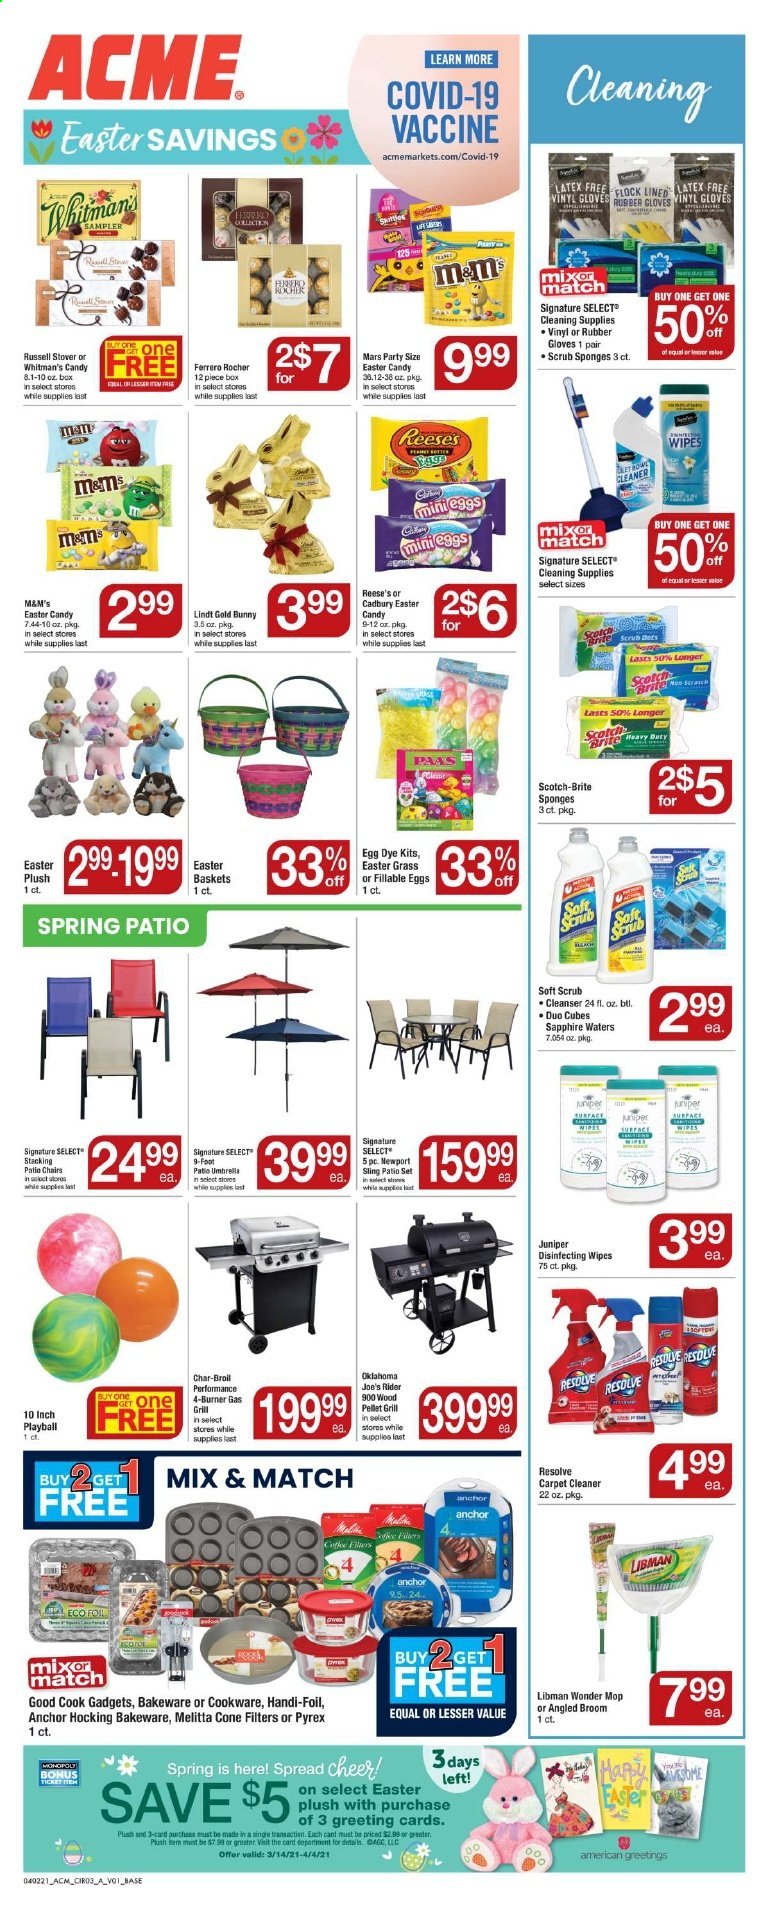 thumbnail - ACME Flyer - 04/02/2021 - 04/08/2021 - Sales products - eggs, Reese's, Lindt, Ferrero Rocher, Mars, M&M's, Cadbury, wipes, cleaner, cleanser, Brite, basket, sponge, mop, broom, cookware set, bakeware, Pyrex, easter basket, gloves, plush toy. Page 4.